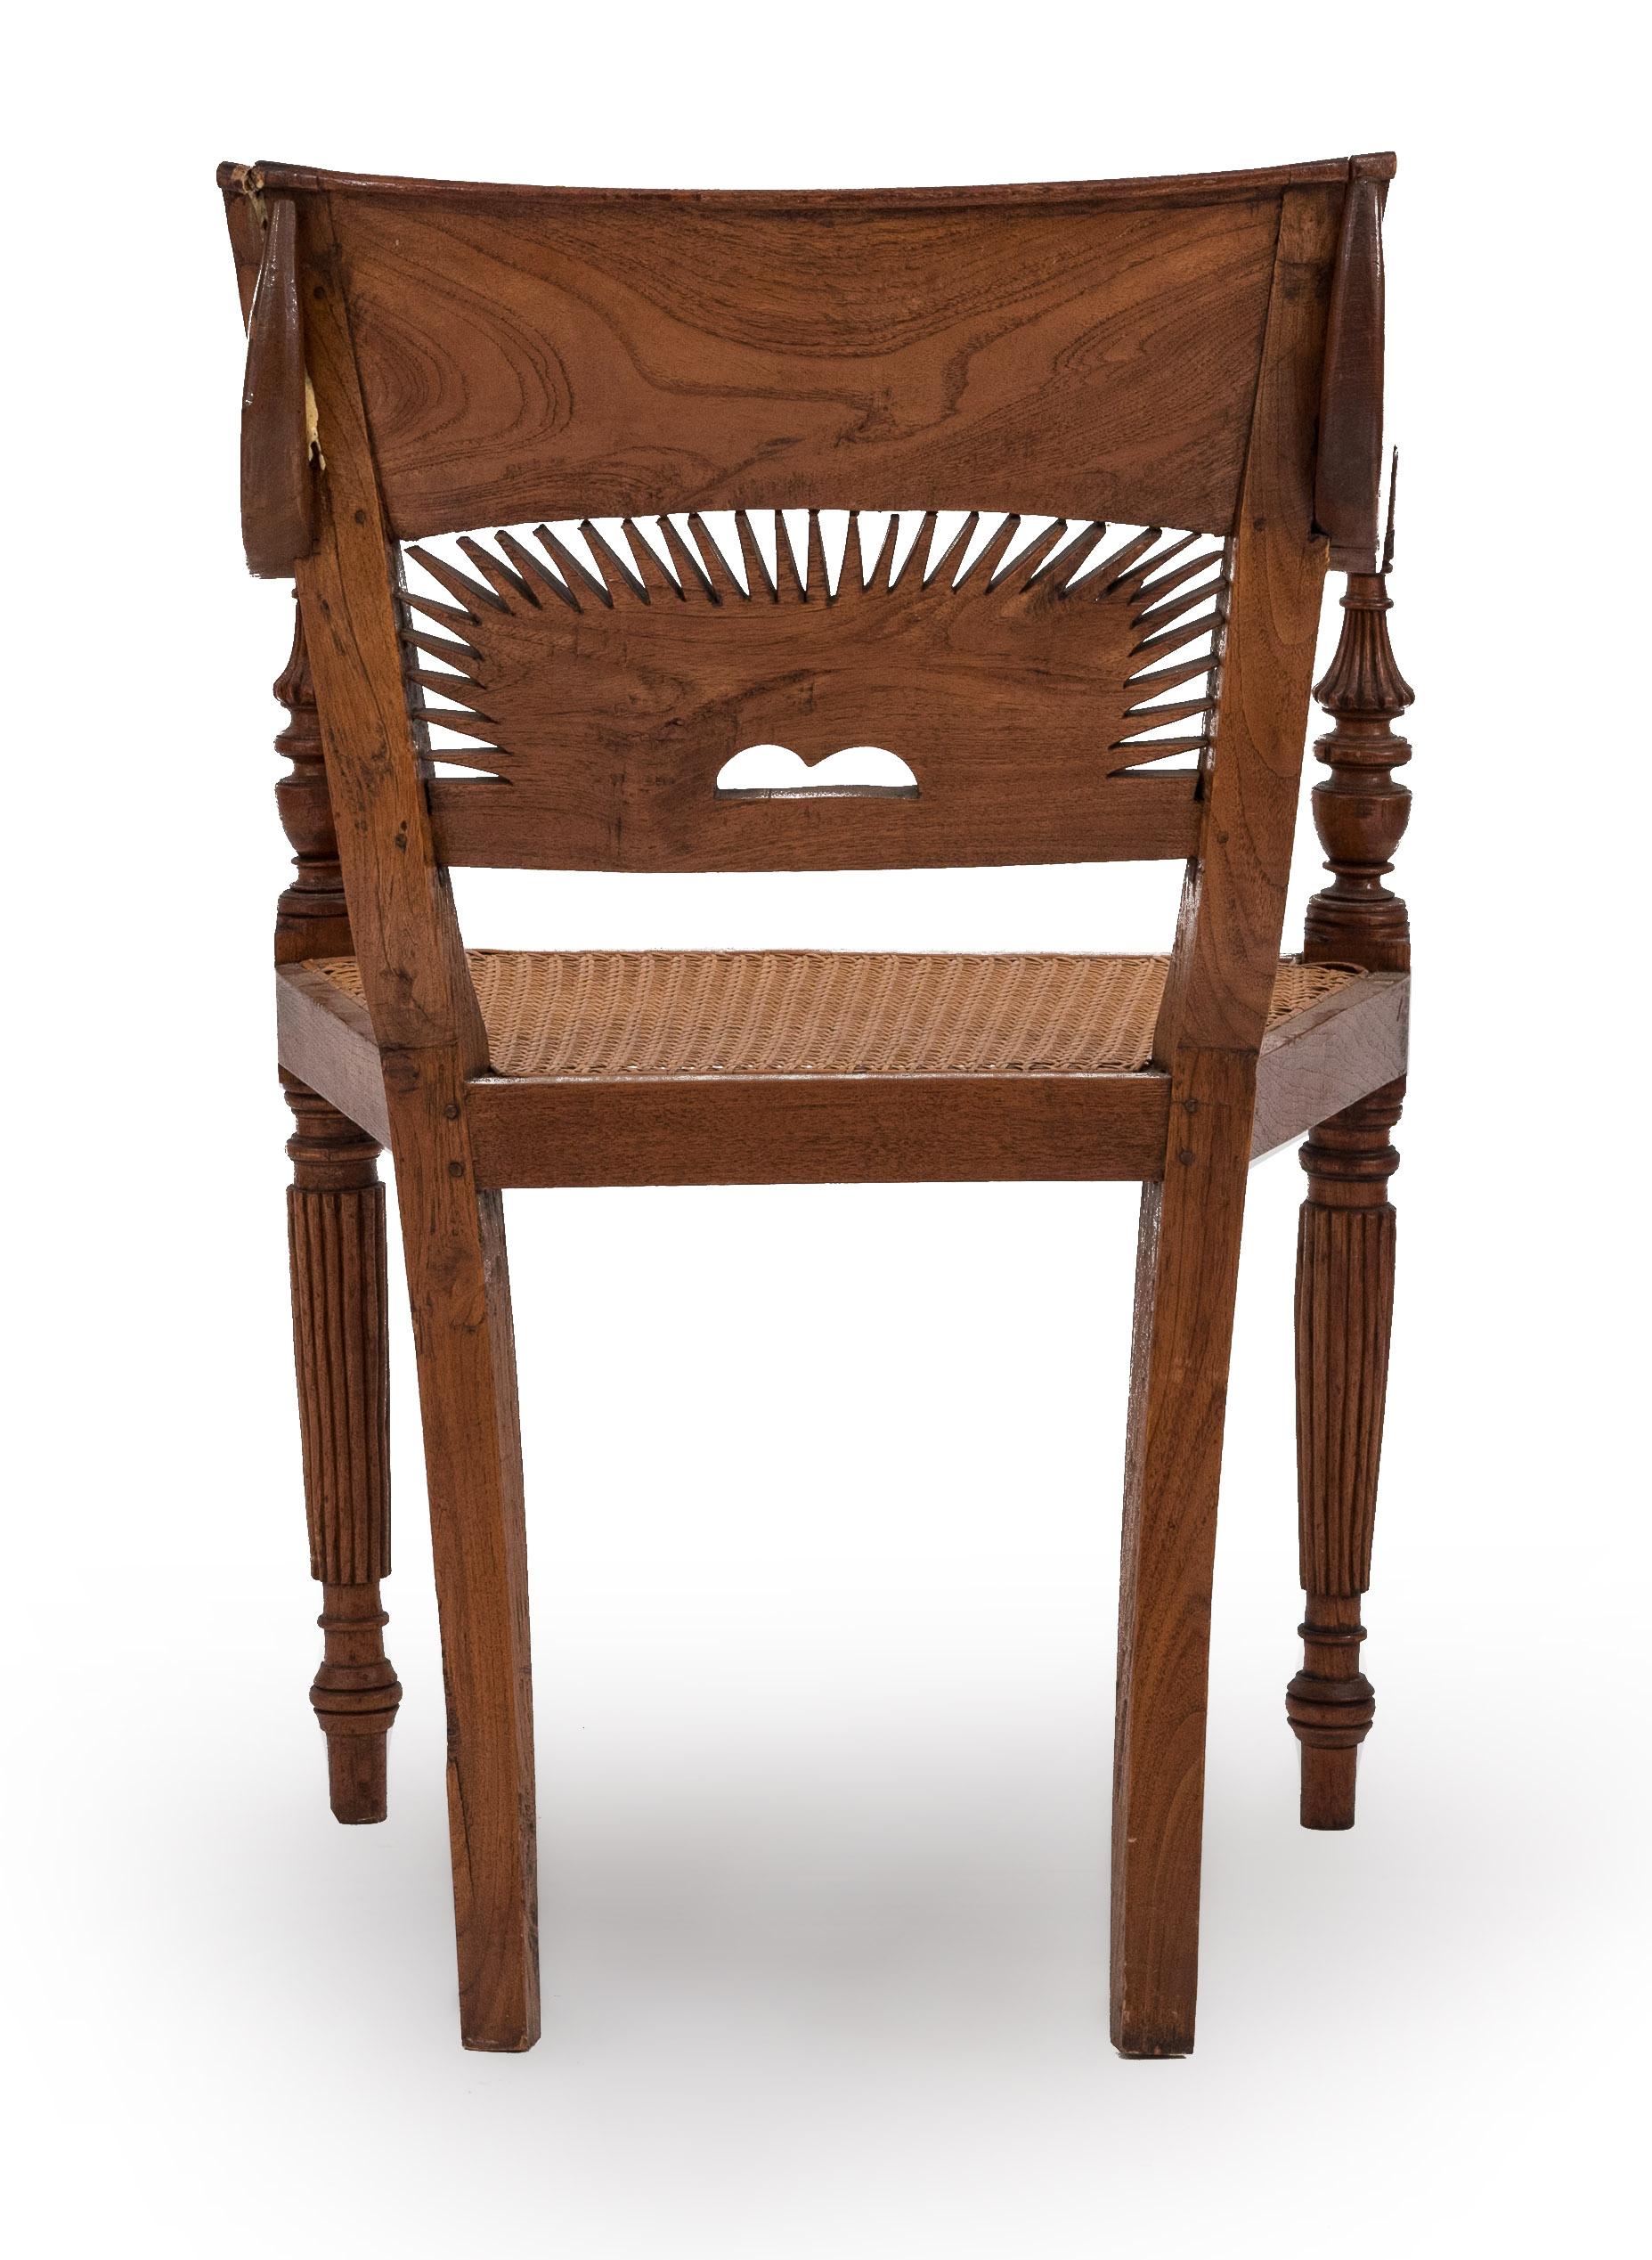 20th Century English Anglo-Indian Teak Arm Chair For Sale